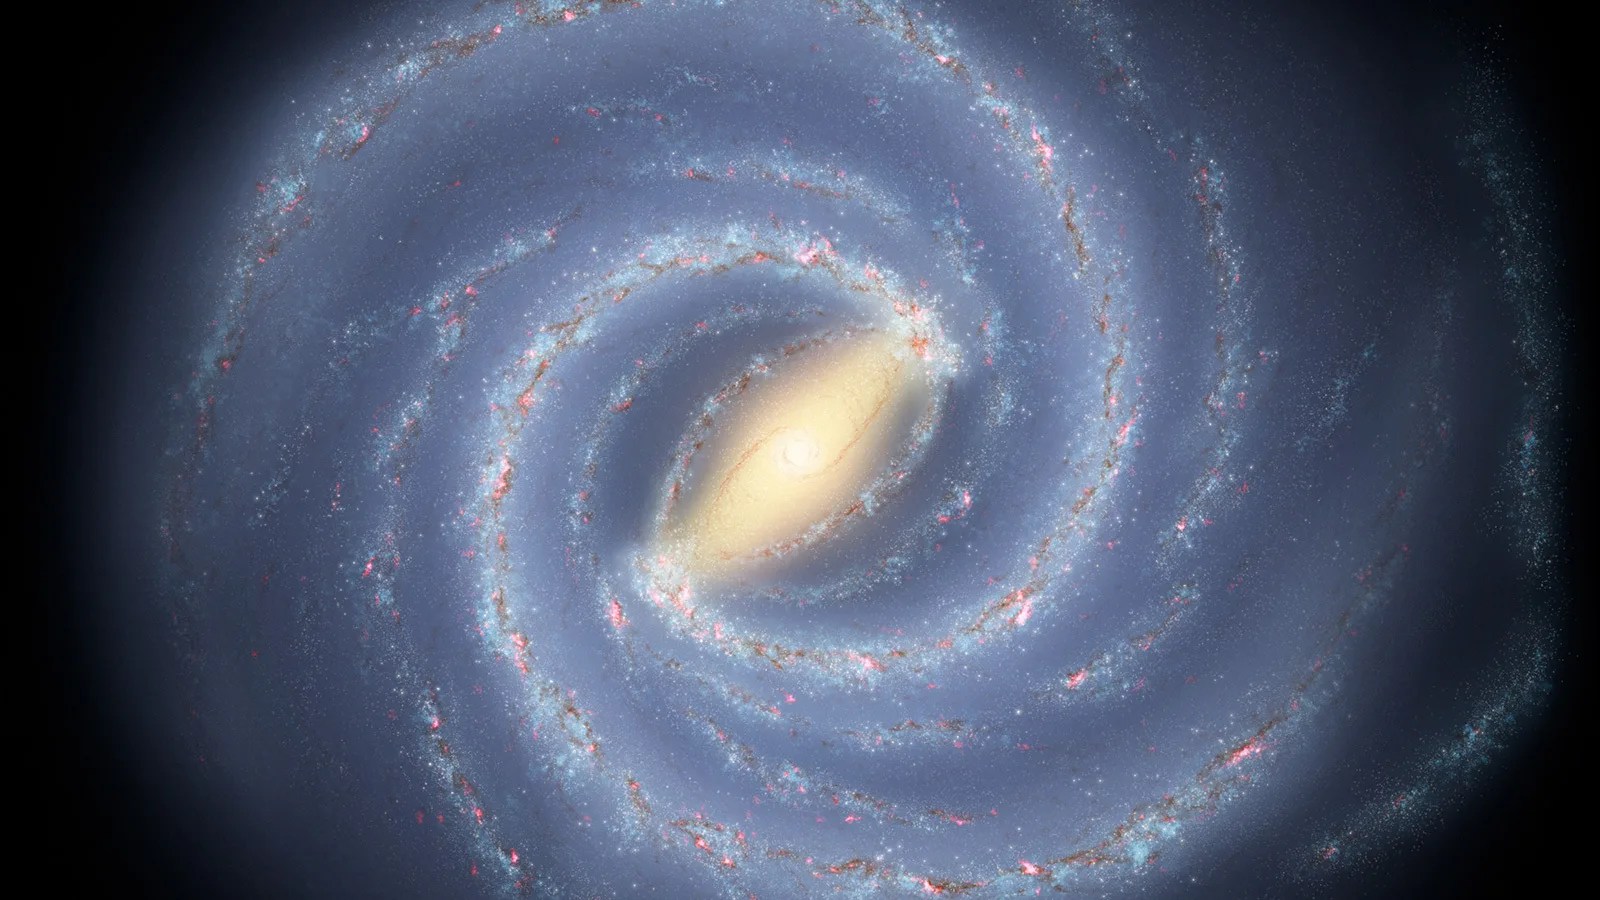 Illustration of a galaxy with a bright center and curved spiral arms.